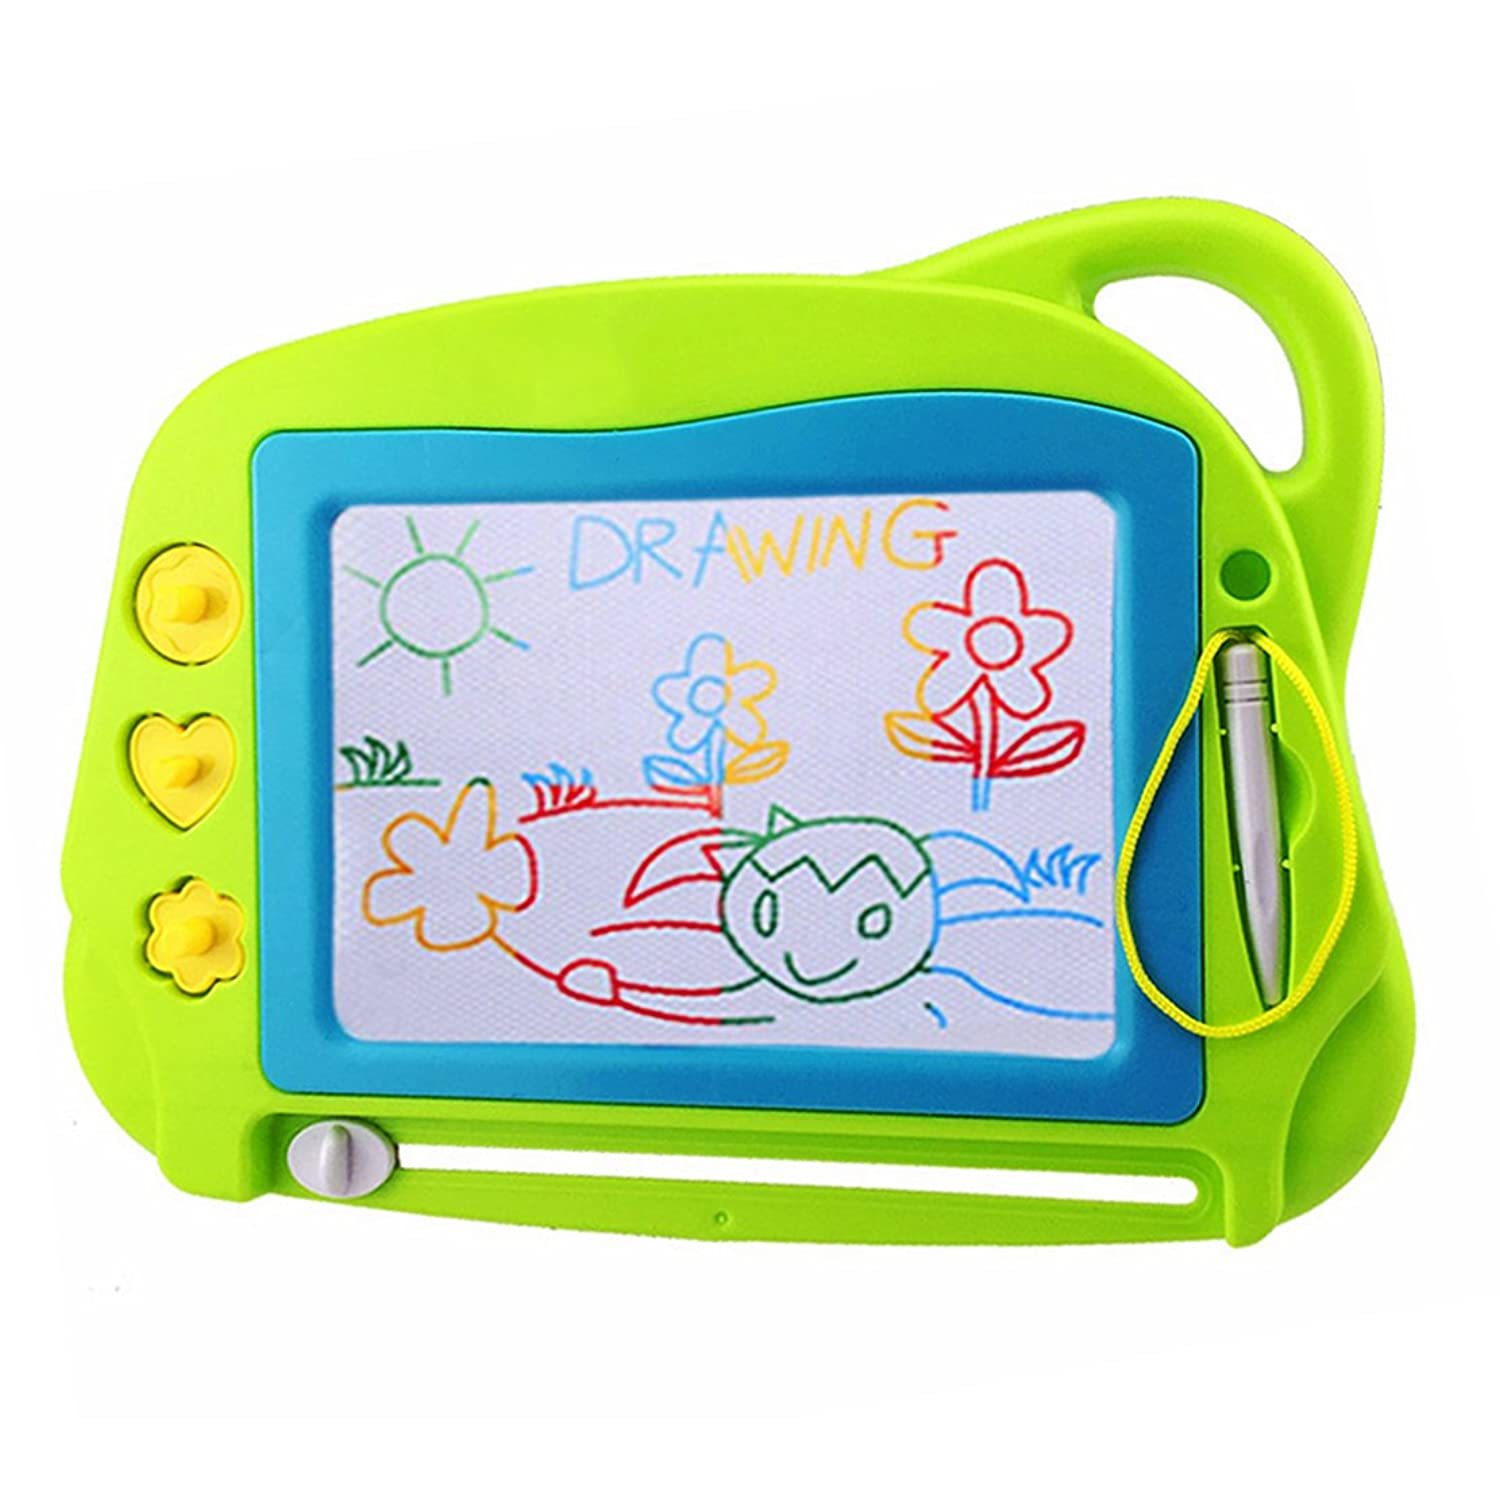 Ic Drawing Board Mini Doodle, Erasable Writing Sketch Colorful Pad Are